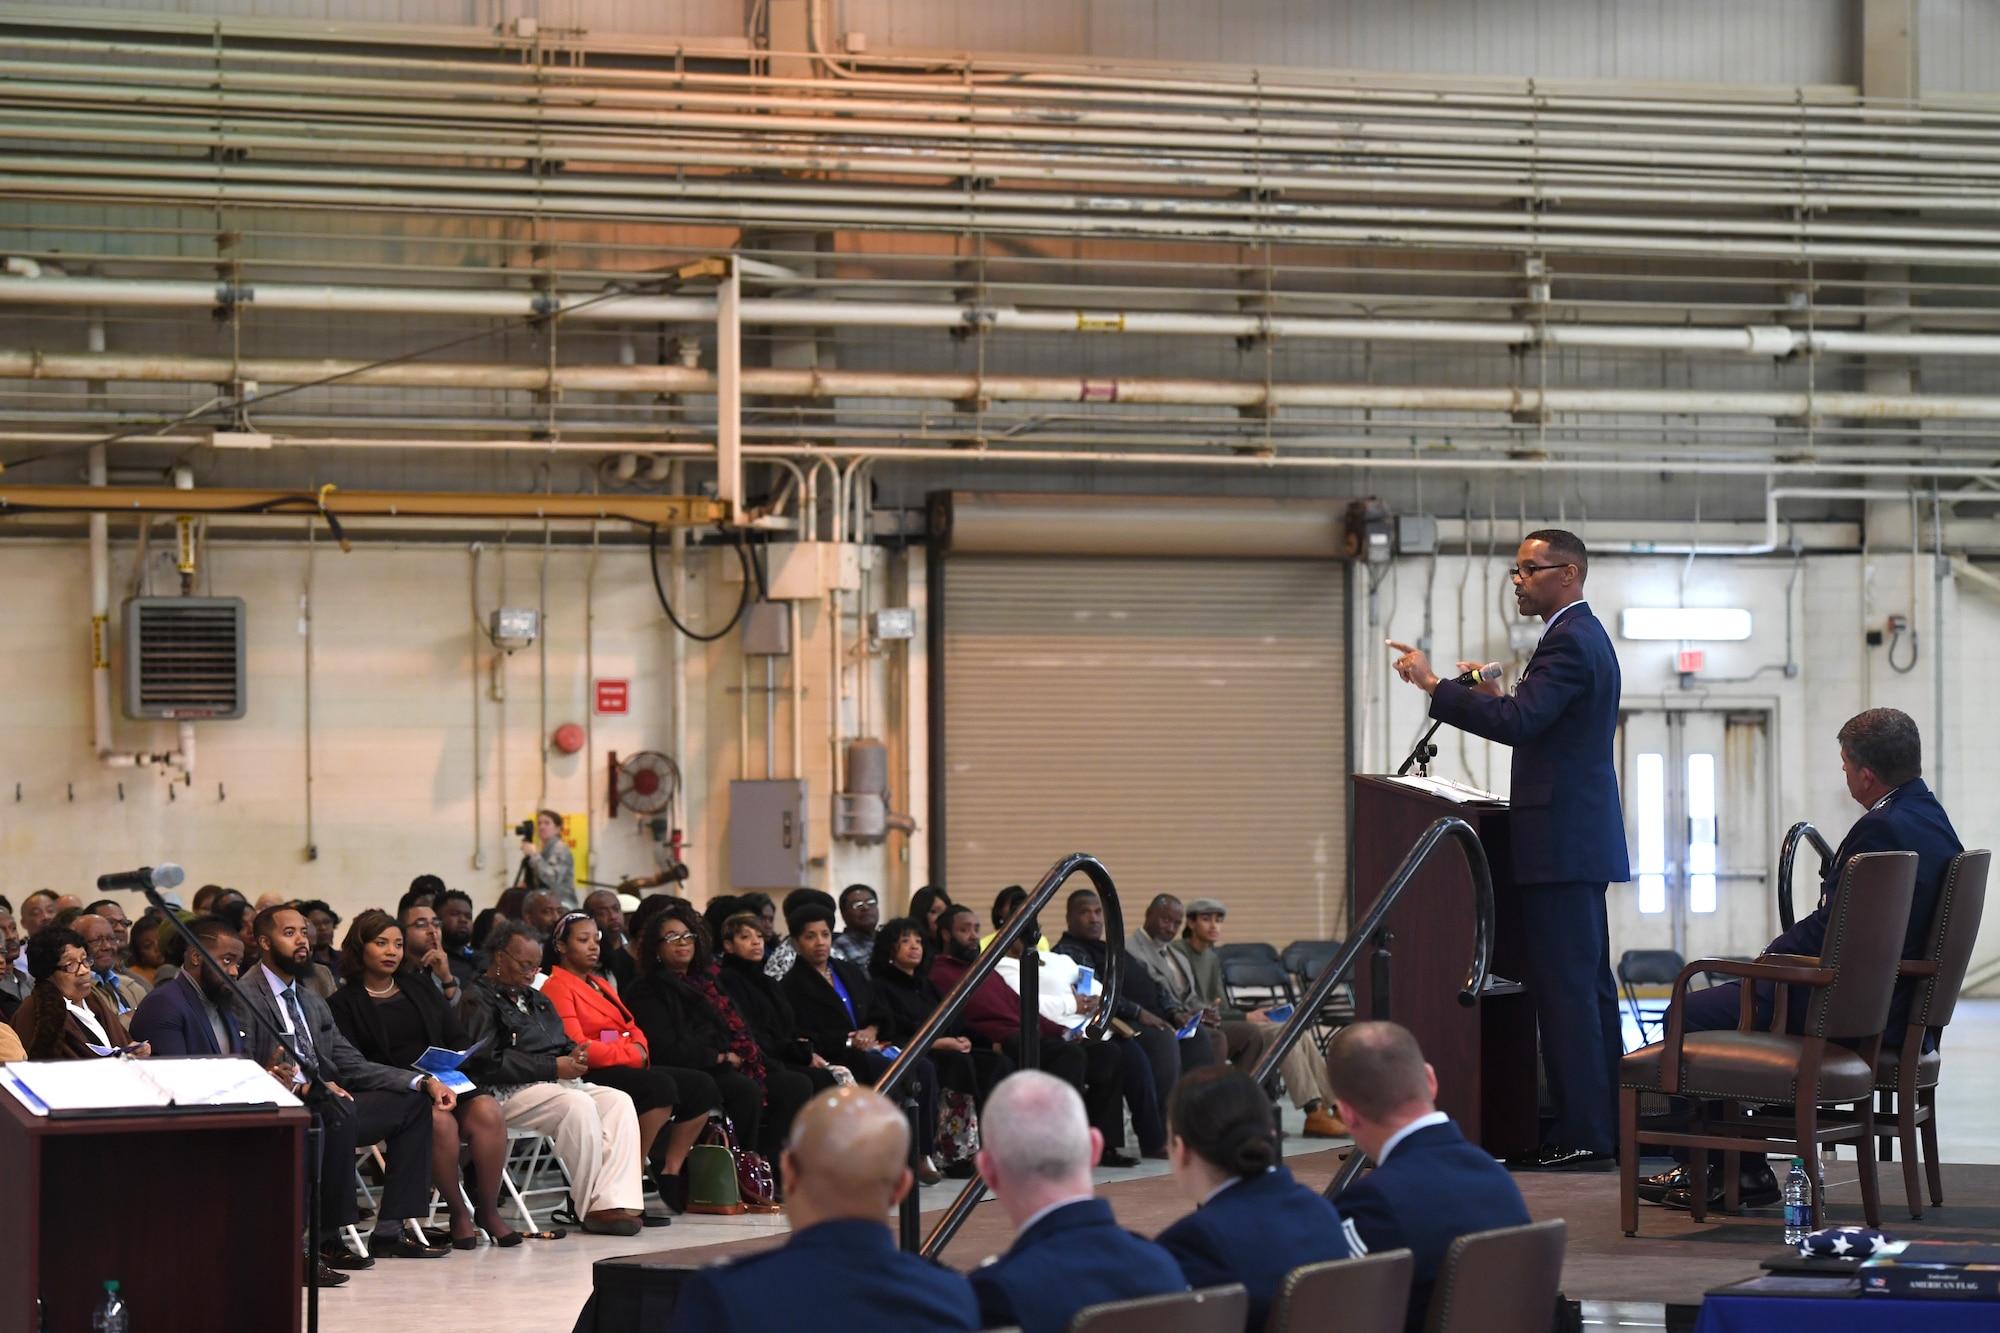 U.S. Air Force Brig. Gen. Clarence Ervin delivers his speech to family members during his retirement ceremony at the North Carolina Air National Guard Base (NCANG), Charlotte Douglas International Airport, Feb. 09, 2019. Family, friends and guard members gathered to celebrate the retirement of Gen. Ervin, Chief of Staff for the NCANG, after serving in the military for 37 years.